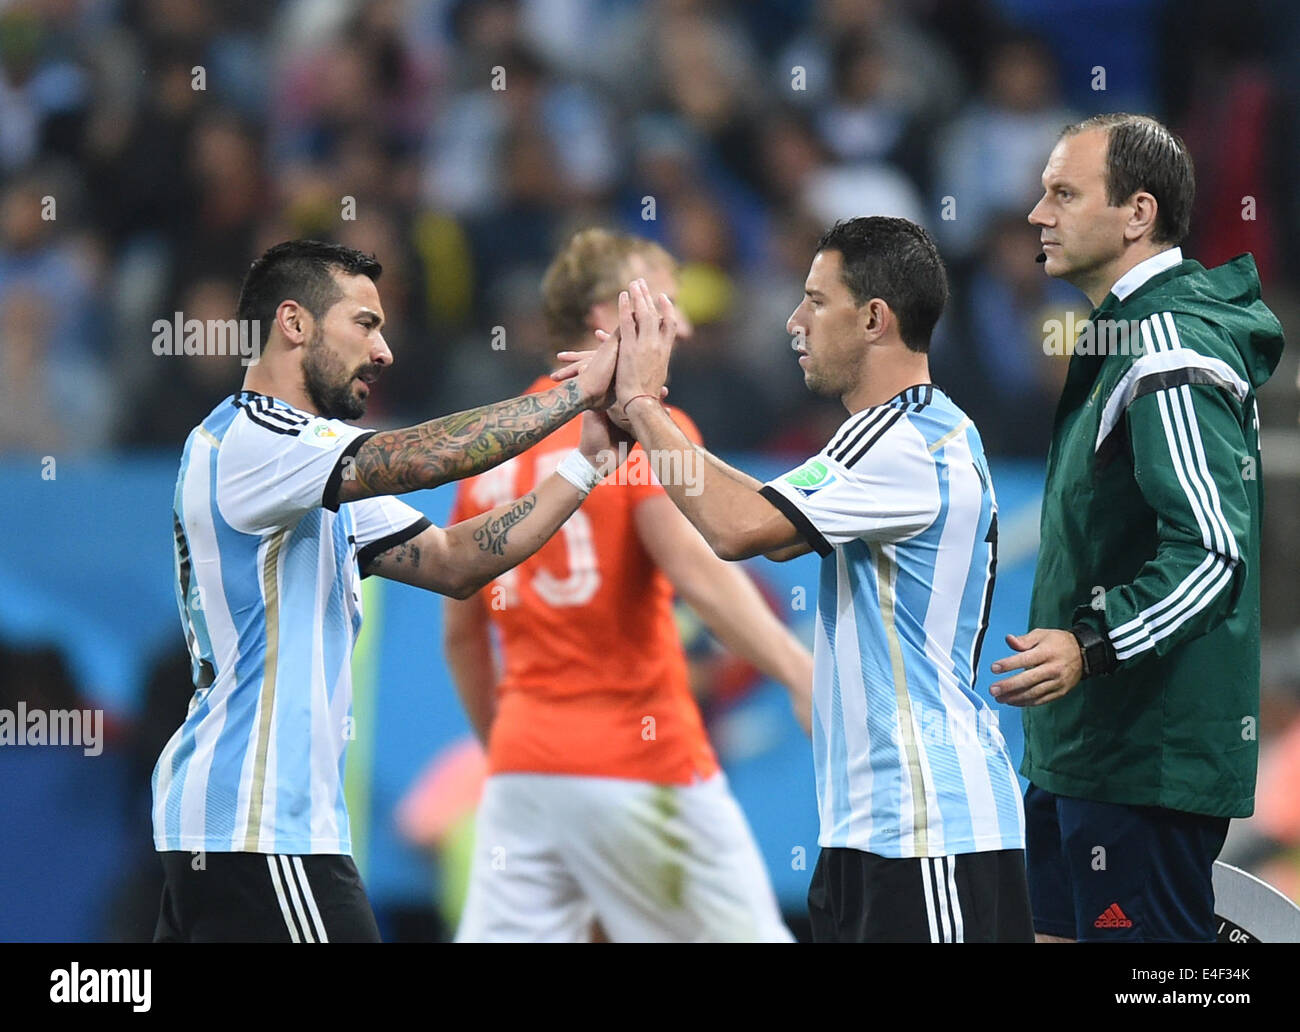 Sao Paulo, Brazil. 09th July, 2014. Ezequiel Lavezzi (L) of Argentina is substituted for Maxi Rodriguez (C) during the FIFA World Cup 2014 semi-final soccer match between the Netherlands and Argentina at the Arena Corinthians in Sao Paulo, Brazil, 09 July 2014. Photo: Marius Becker/dpa/Alamy Live News Stock Photo